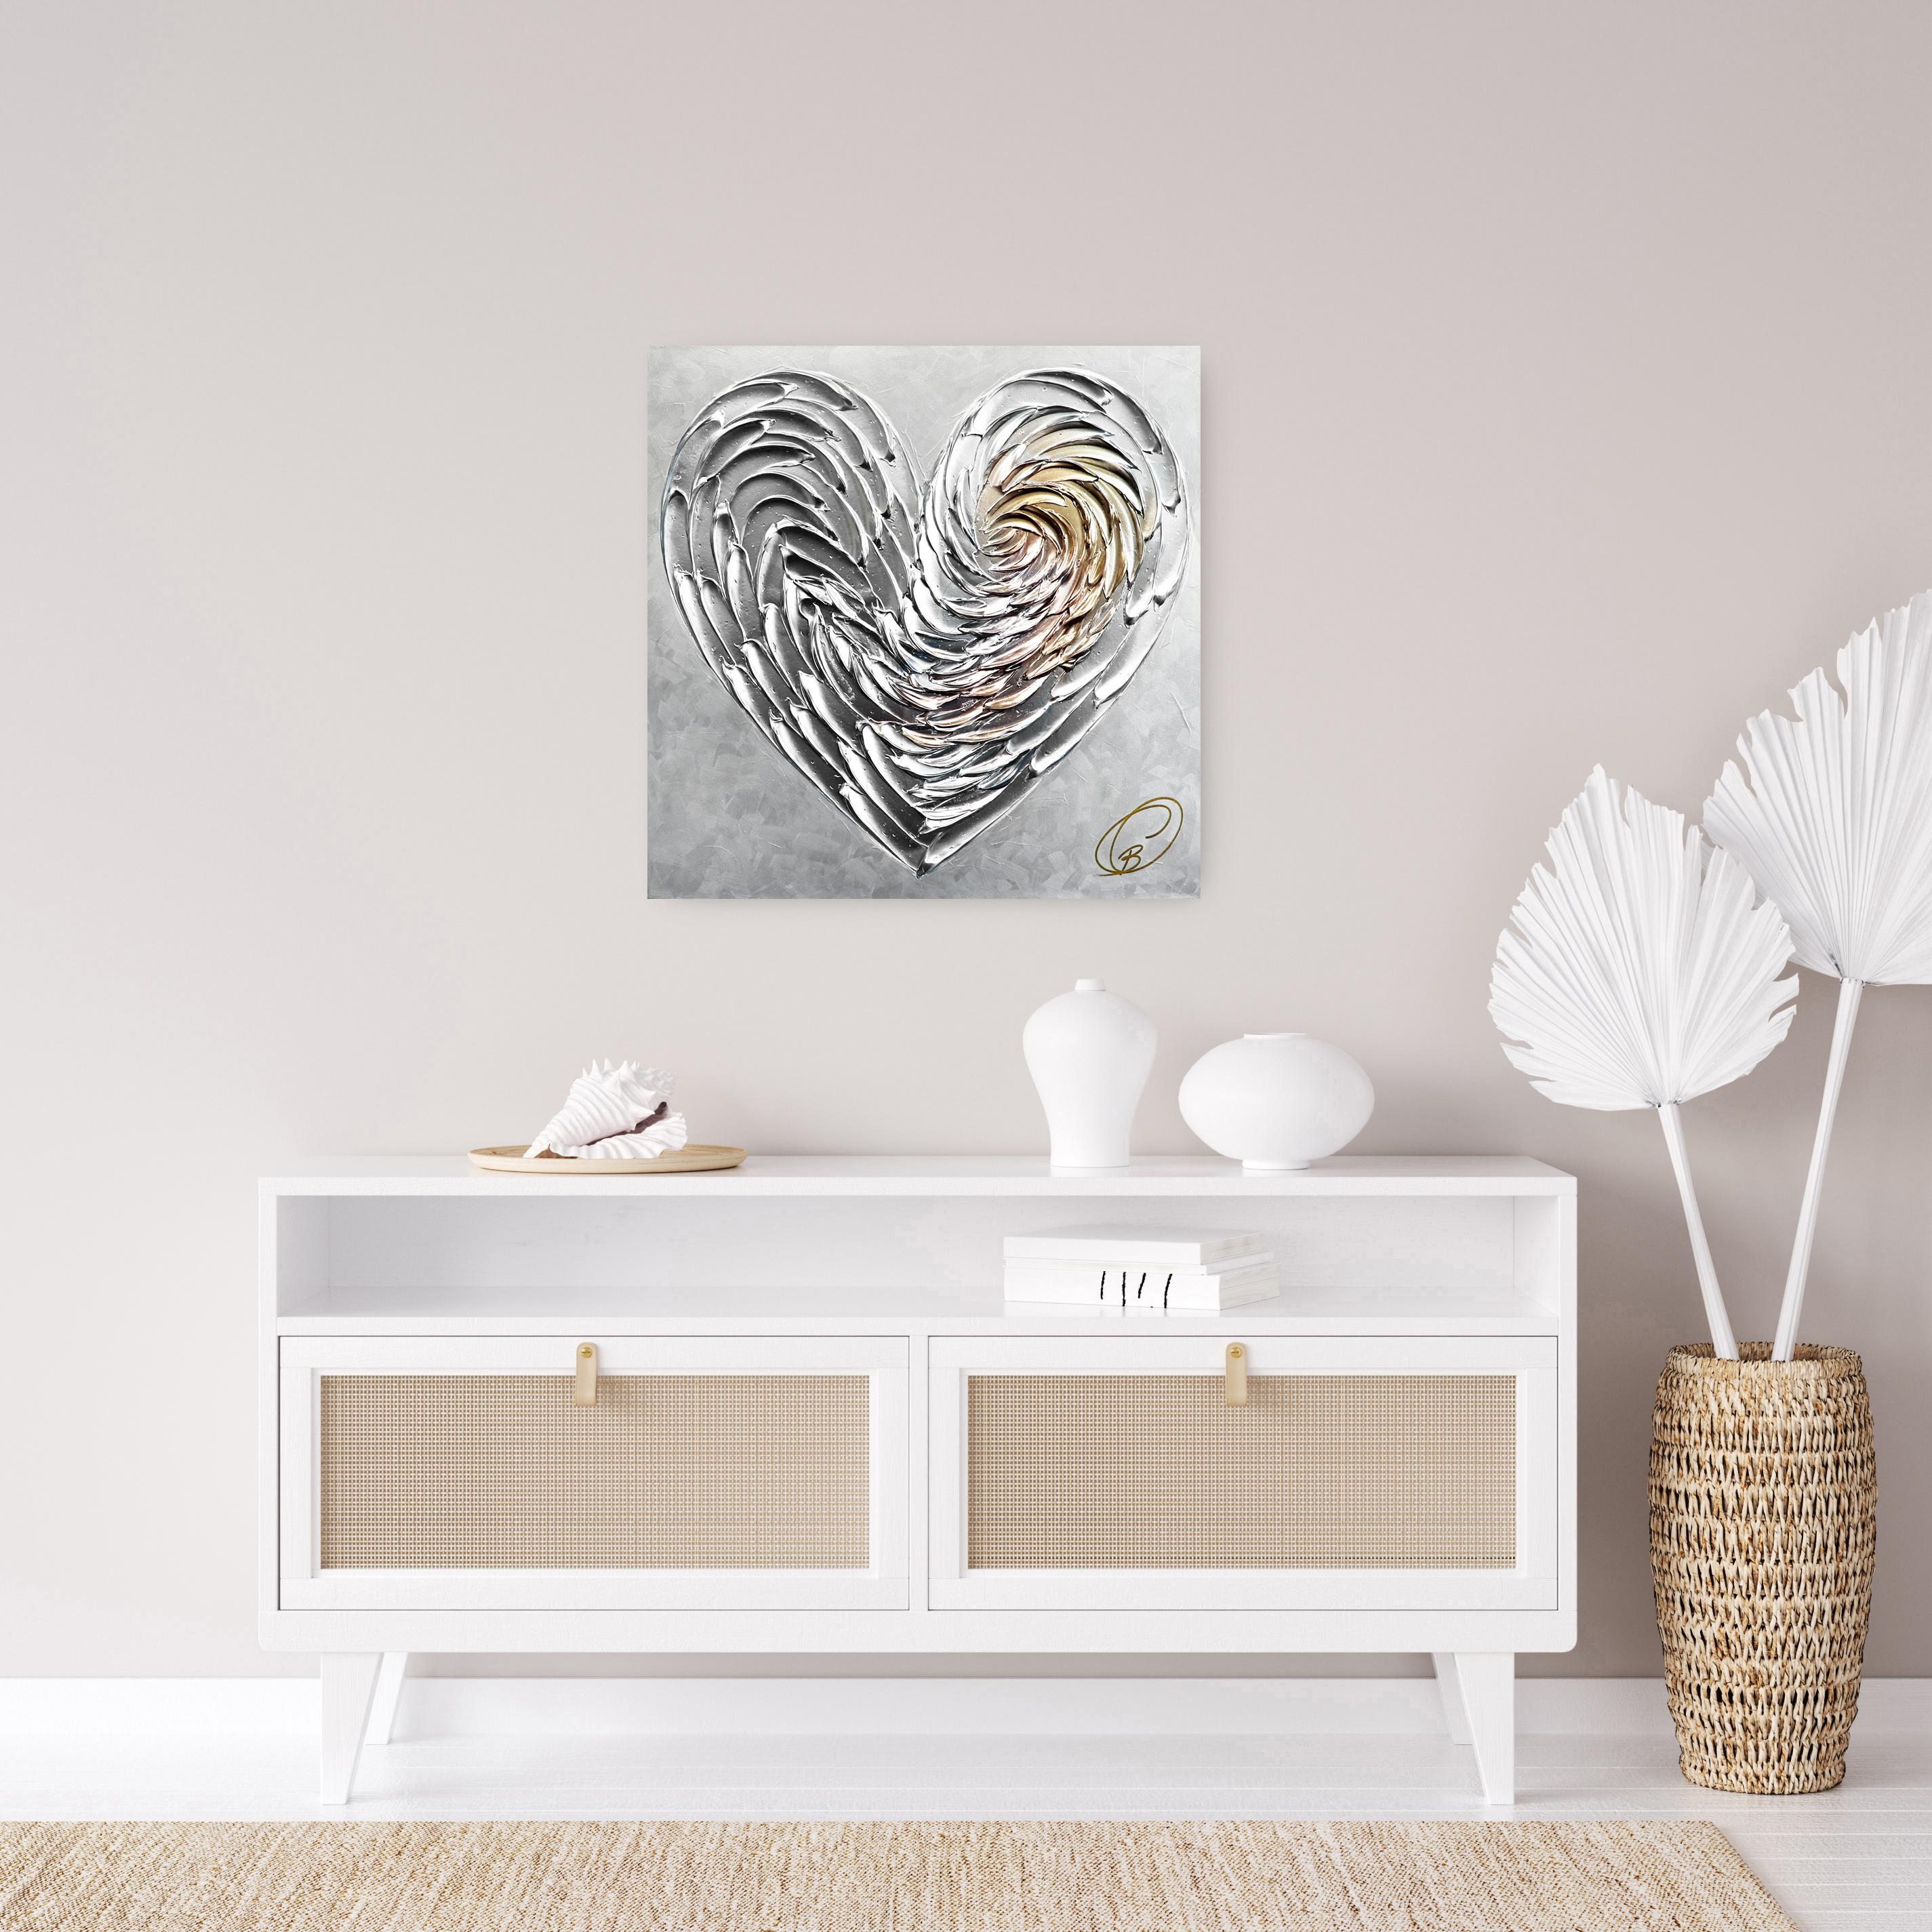 L'Incroyable Coeur D'Amour - Impasto Thick Paint Original Silver Heart Artwork - Painting by Cynthia Coulombe Bégin